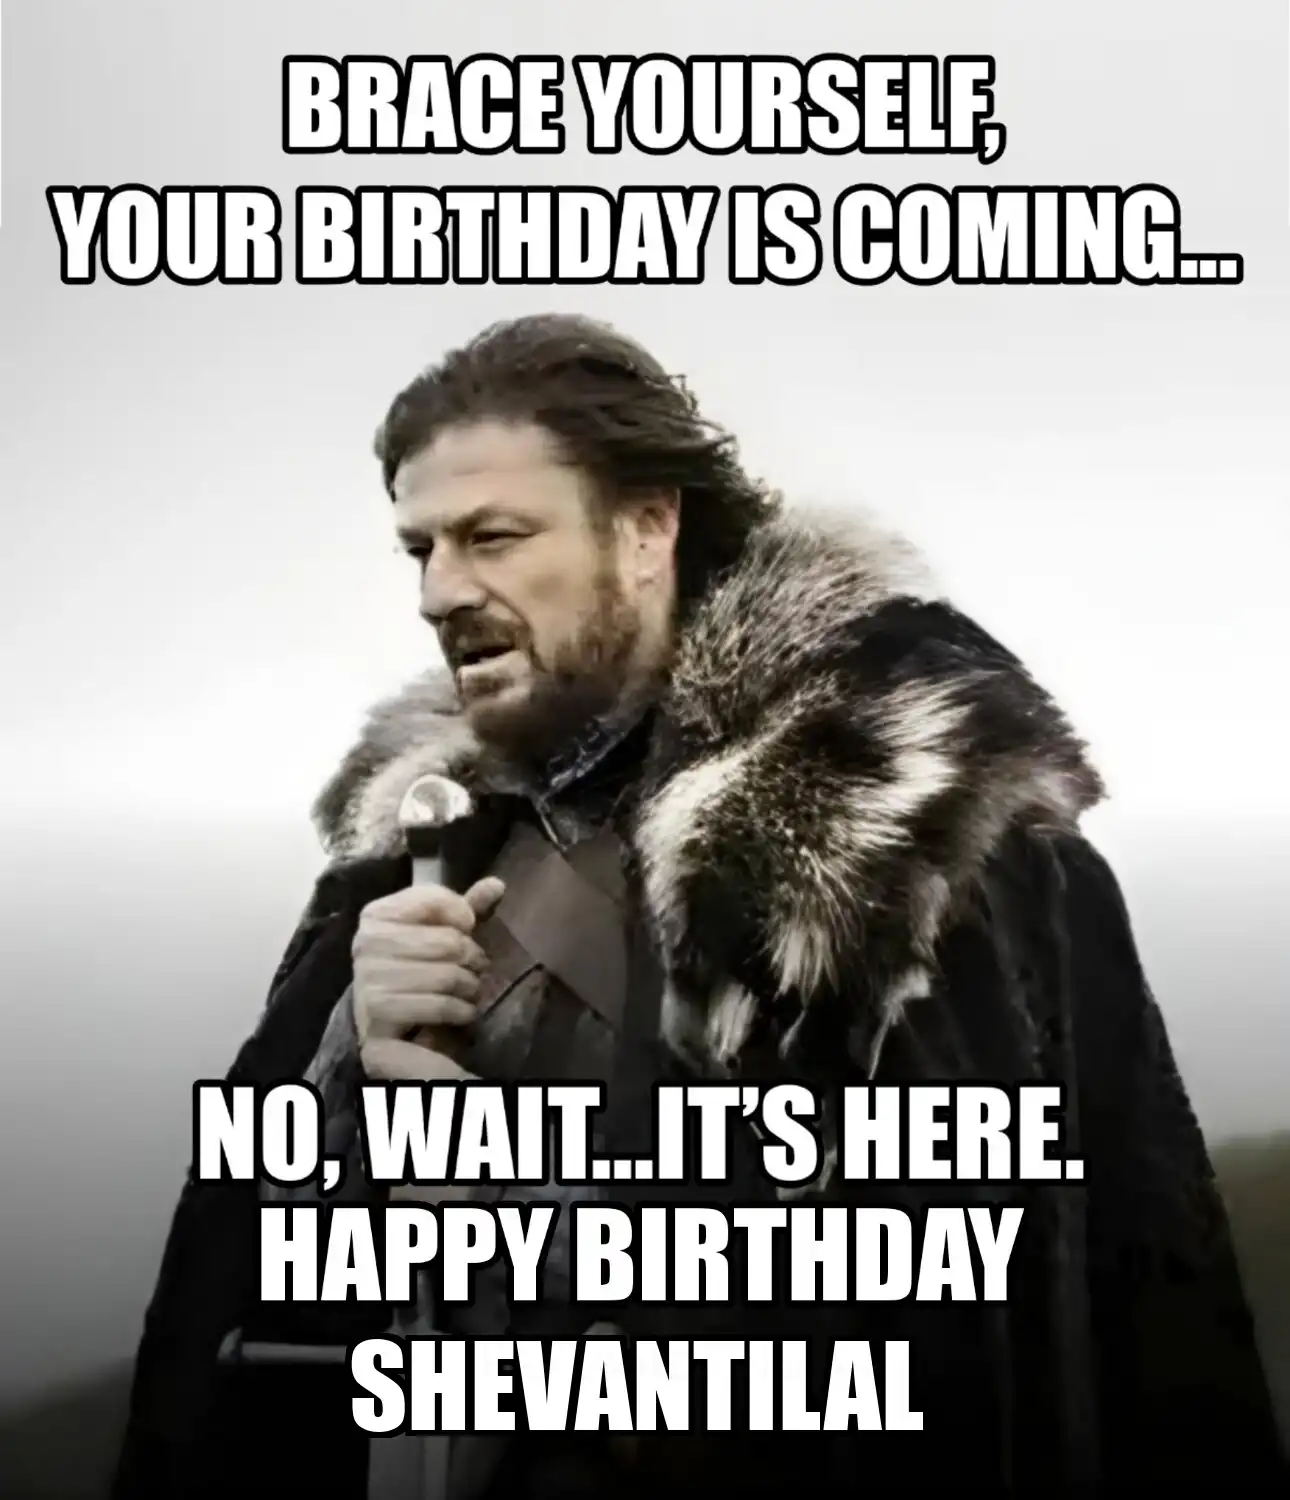 Happy Birthday Shevantilal Brace Yourself Your Birthday Is Coming Meme